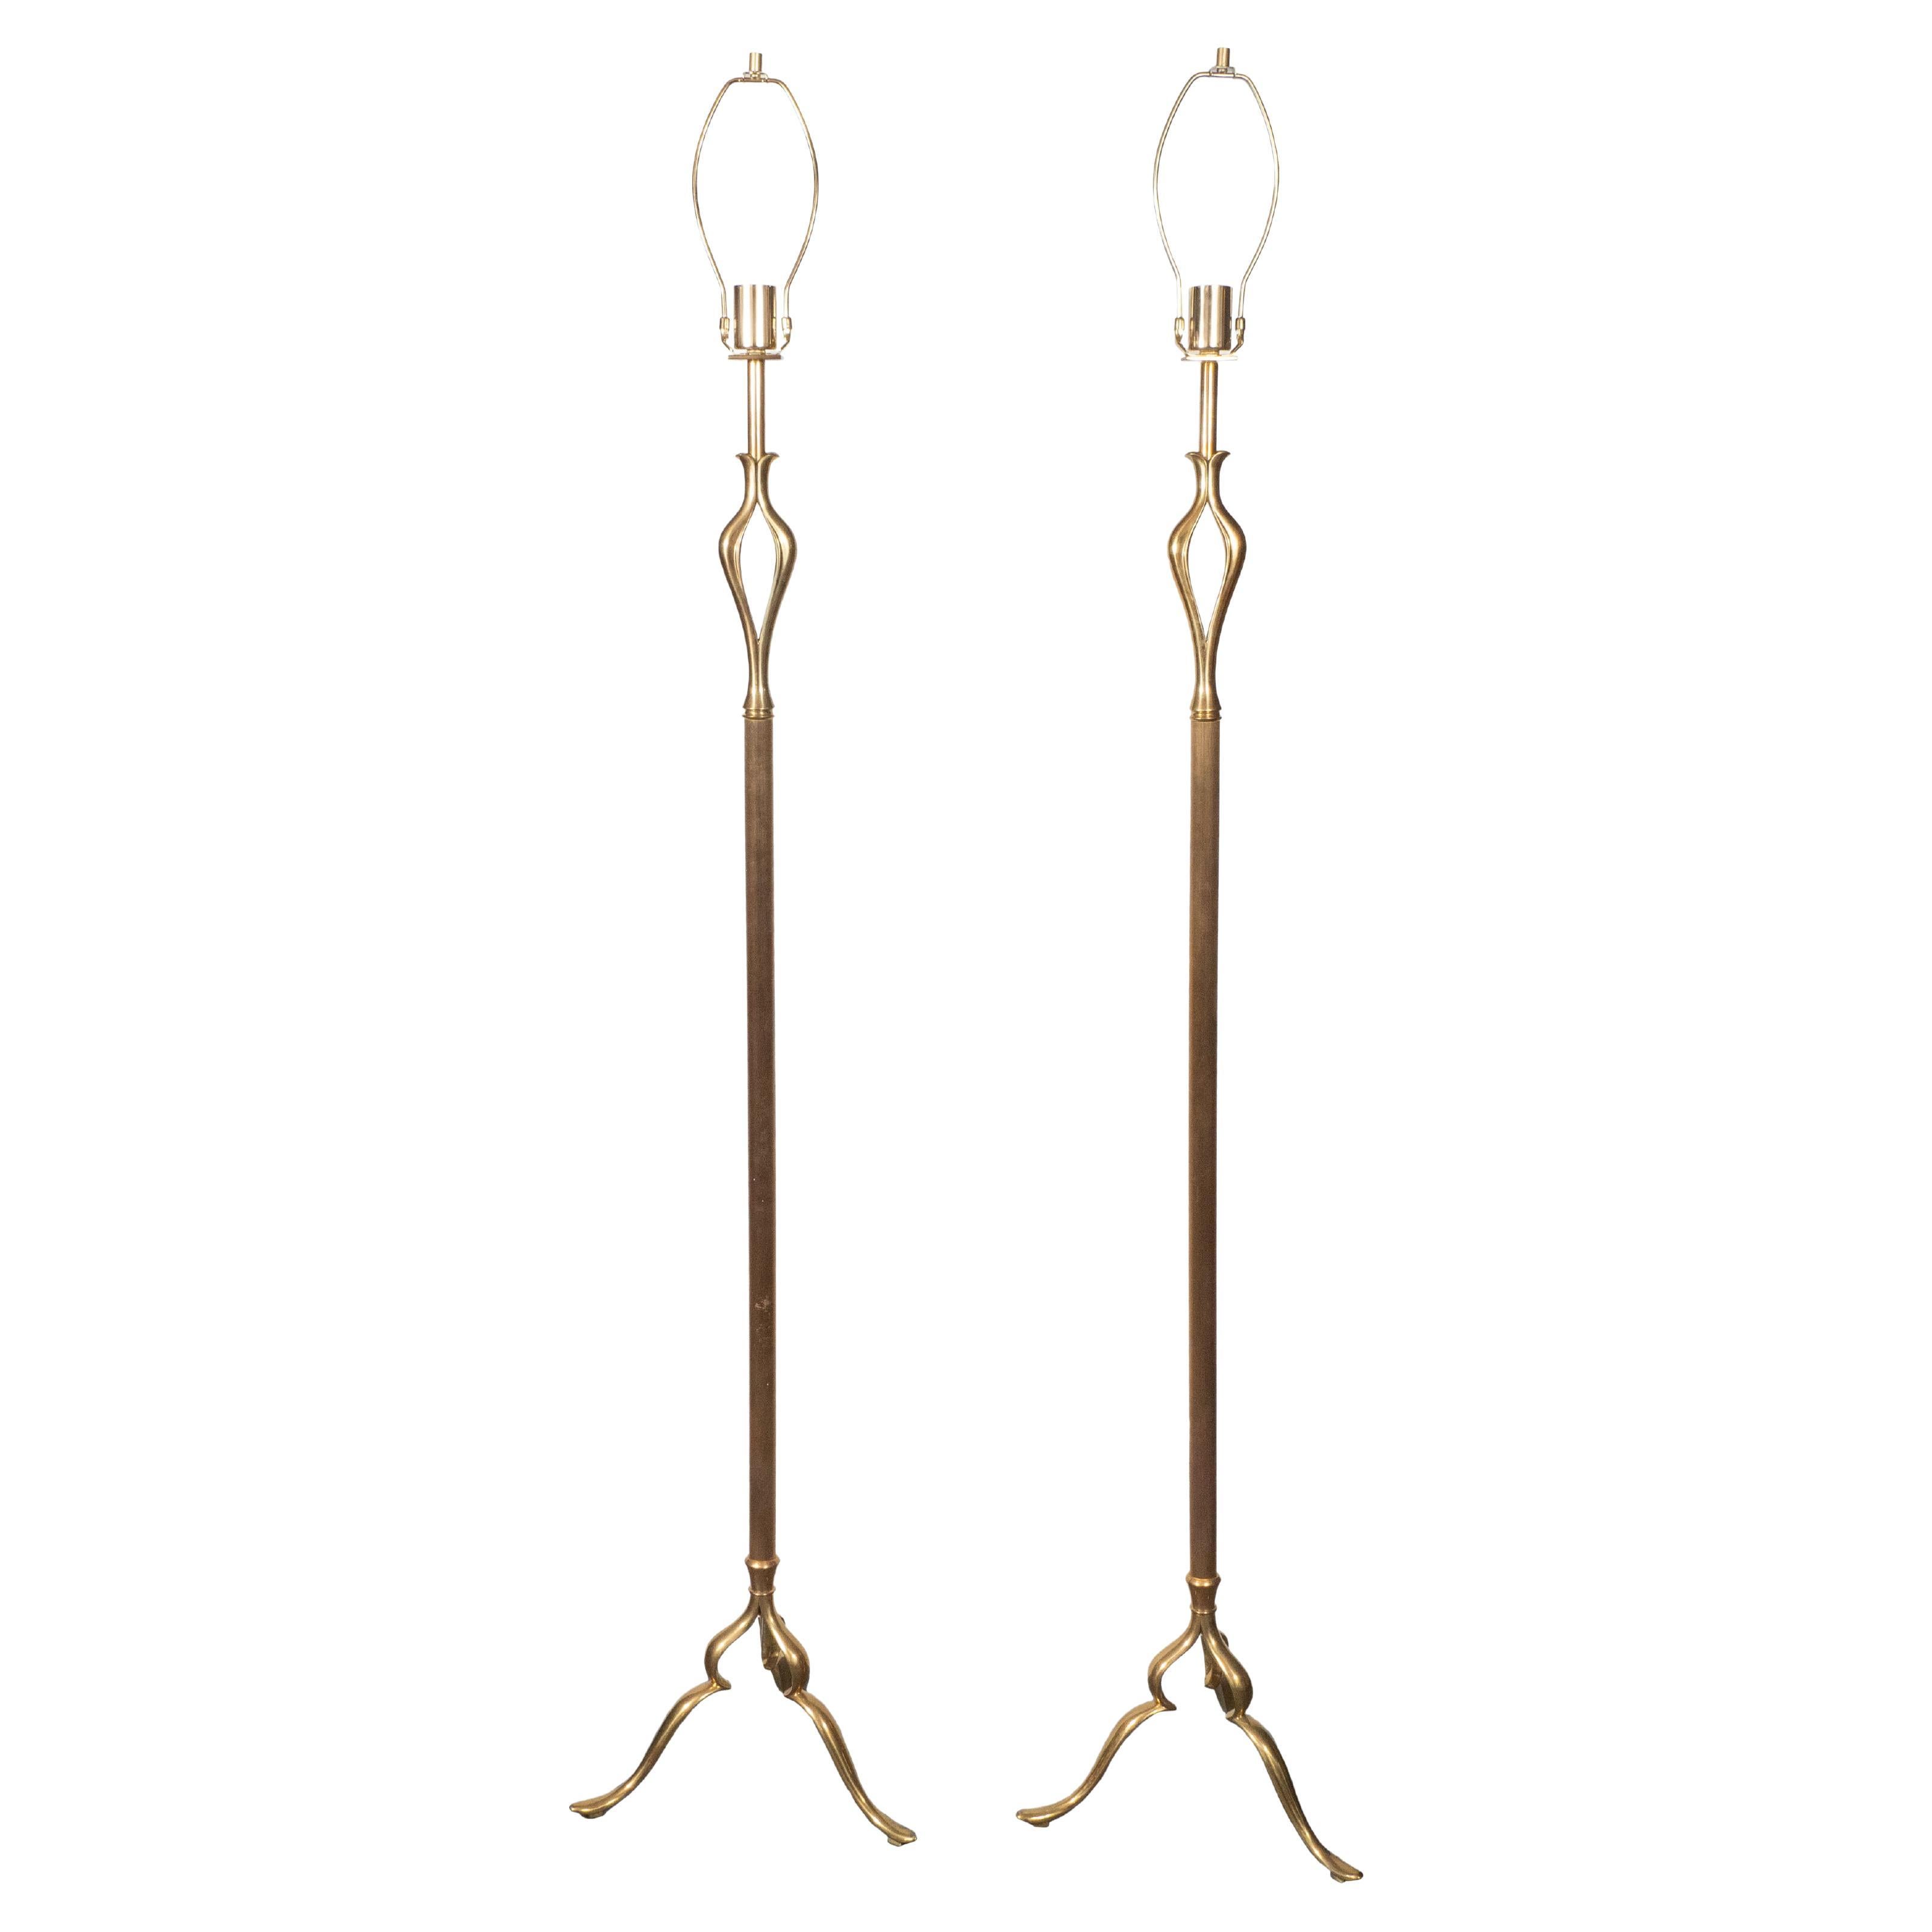 Pair of Sculptural Fluted Brass Floor Lamps For Sale